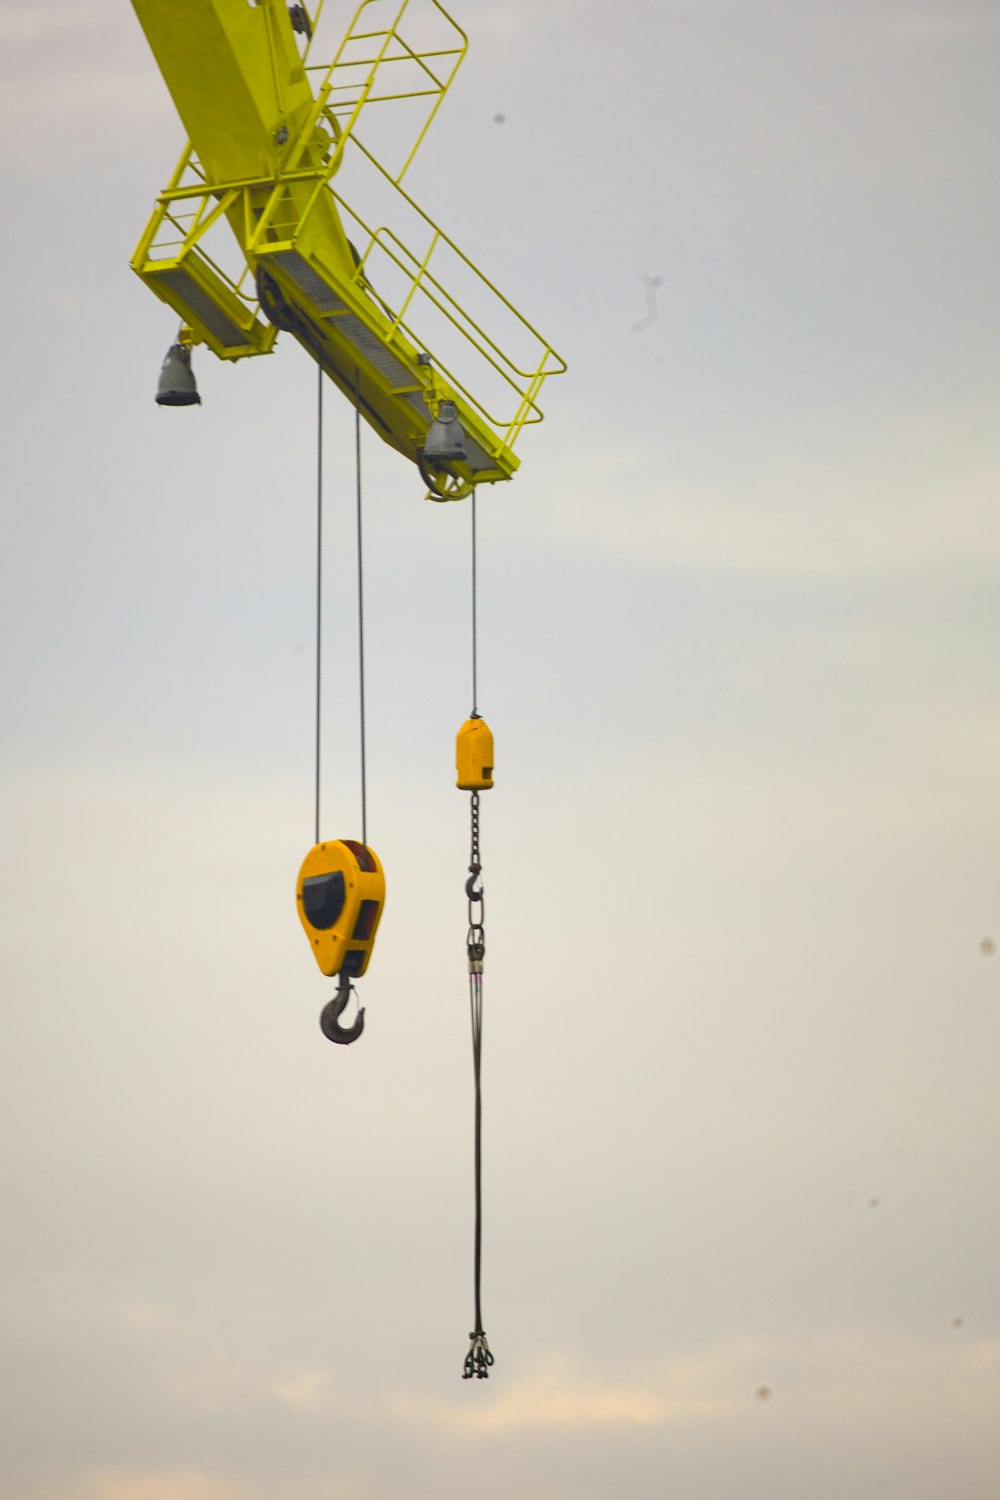 a yellow crane is lifting a yellow object into the air